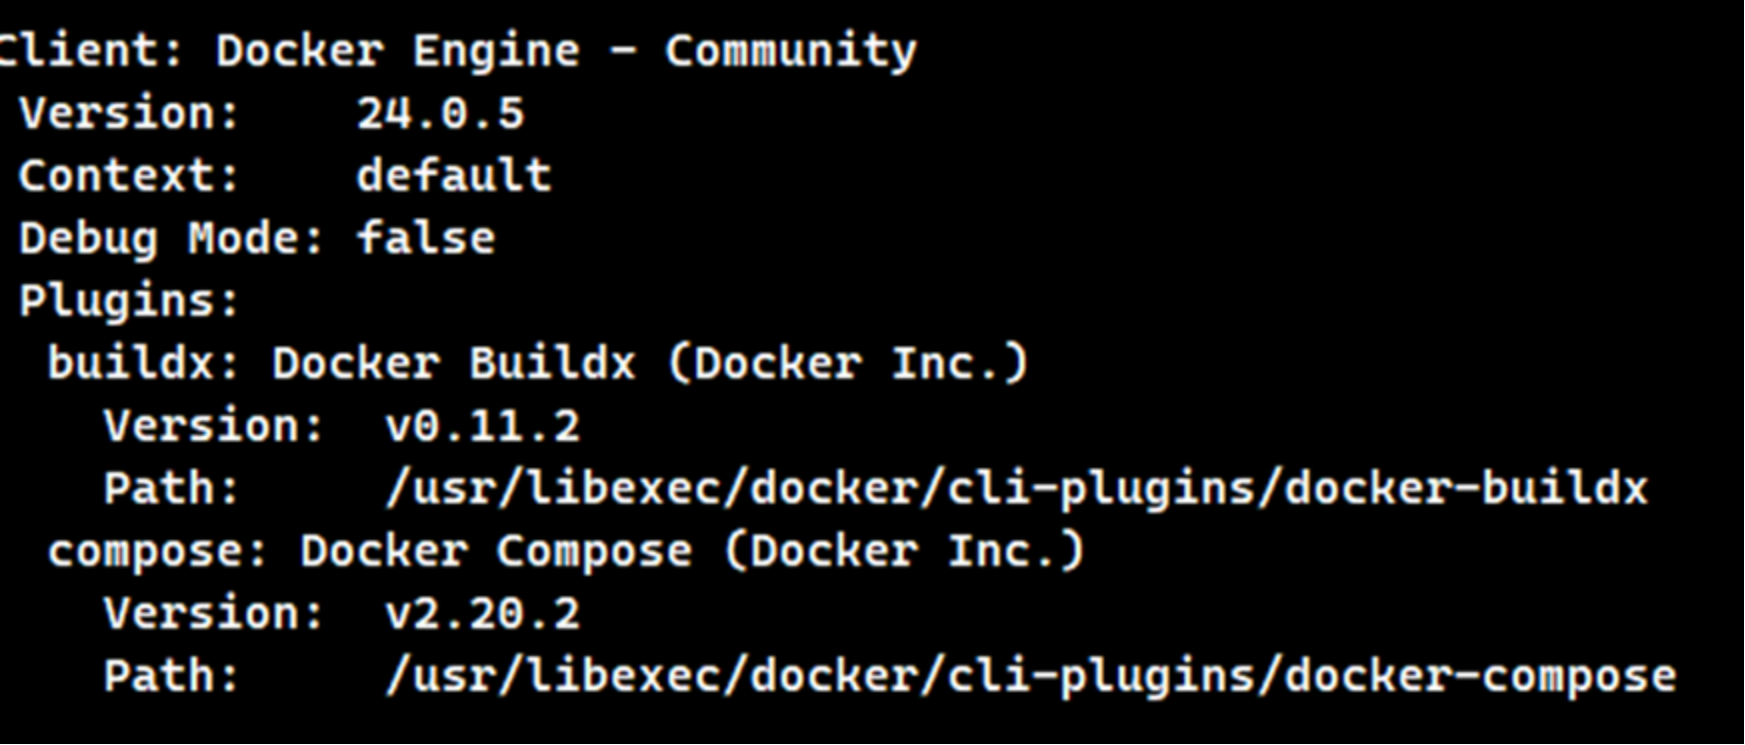 Code and output of the docker info command